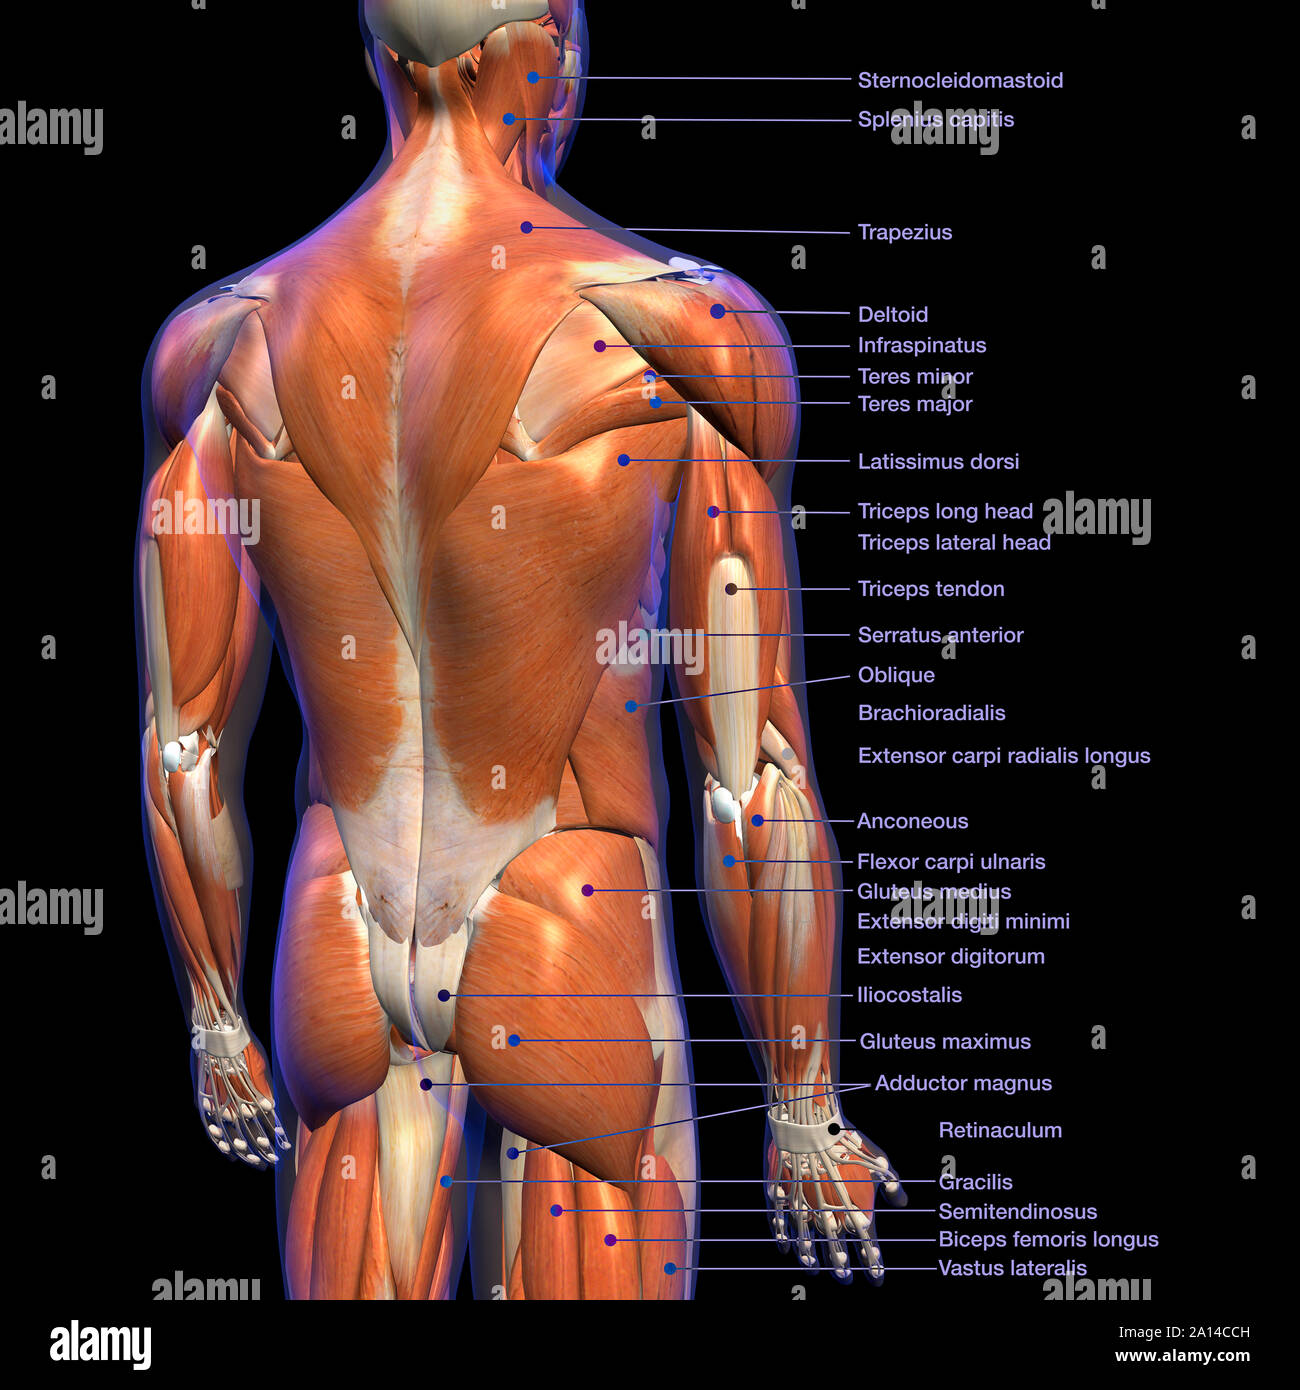 Labeled Anatomy Chart Of Male Back Muscles On Black Background Stock Photo Alamy